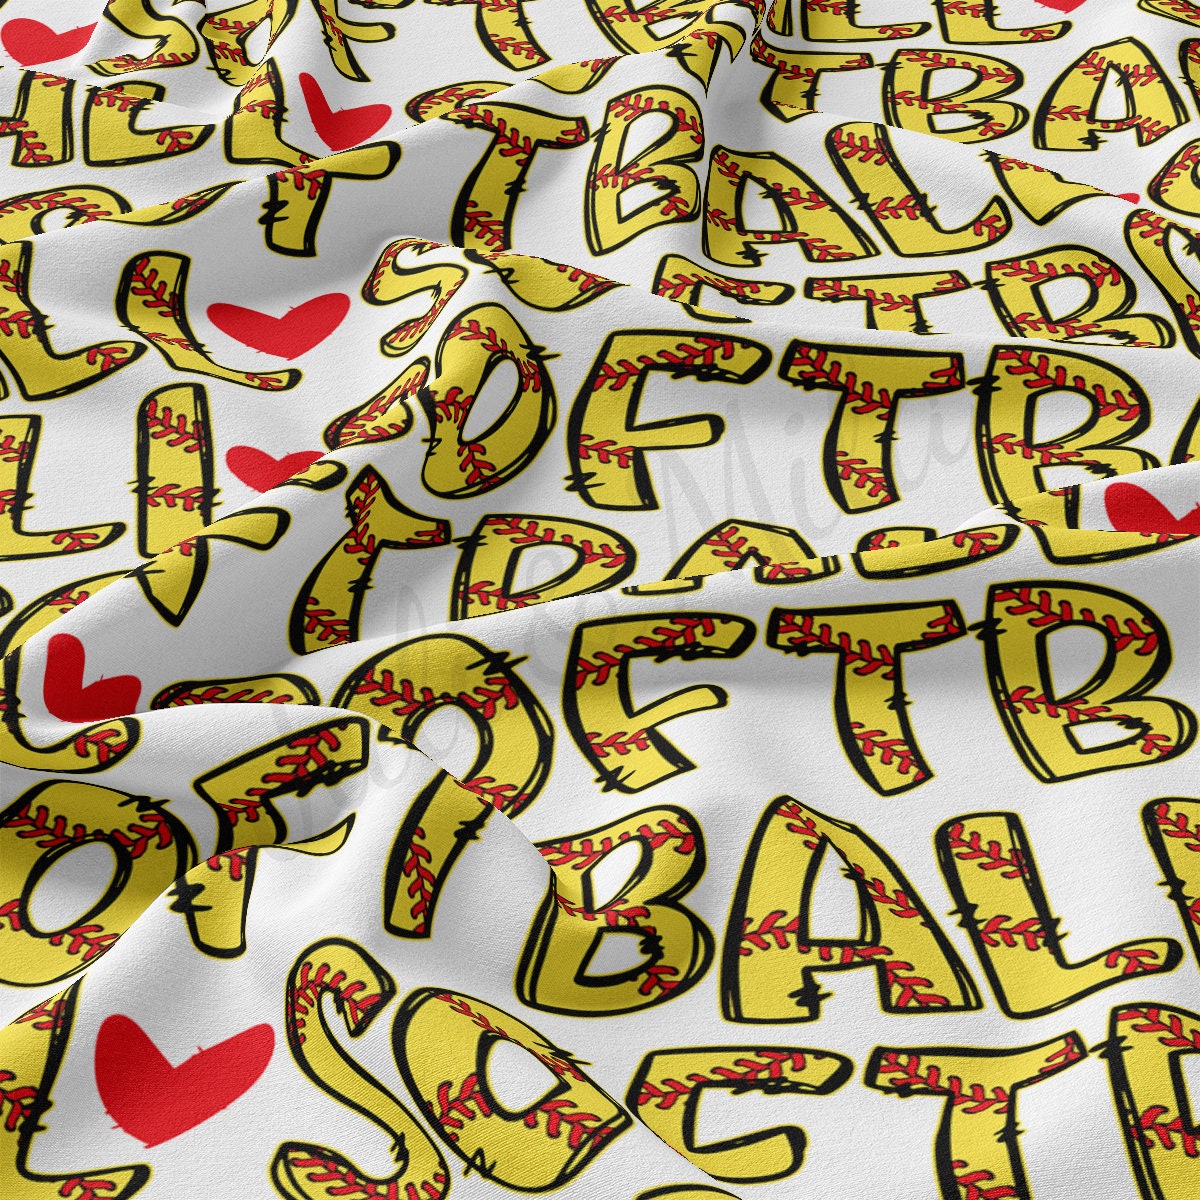 Softball DBP Fabric Double Brushed Polyester Fabric by the Yard DBP Jersey Stretchy Soft Polyester Stretch Fabric DBP1994